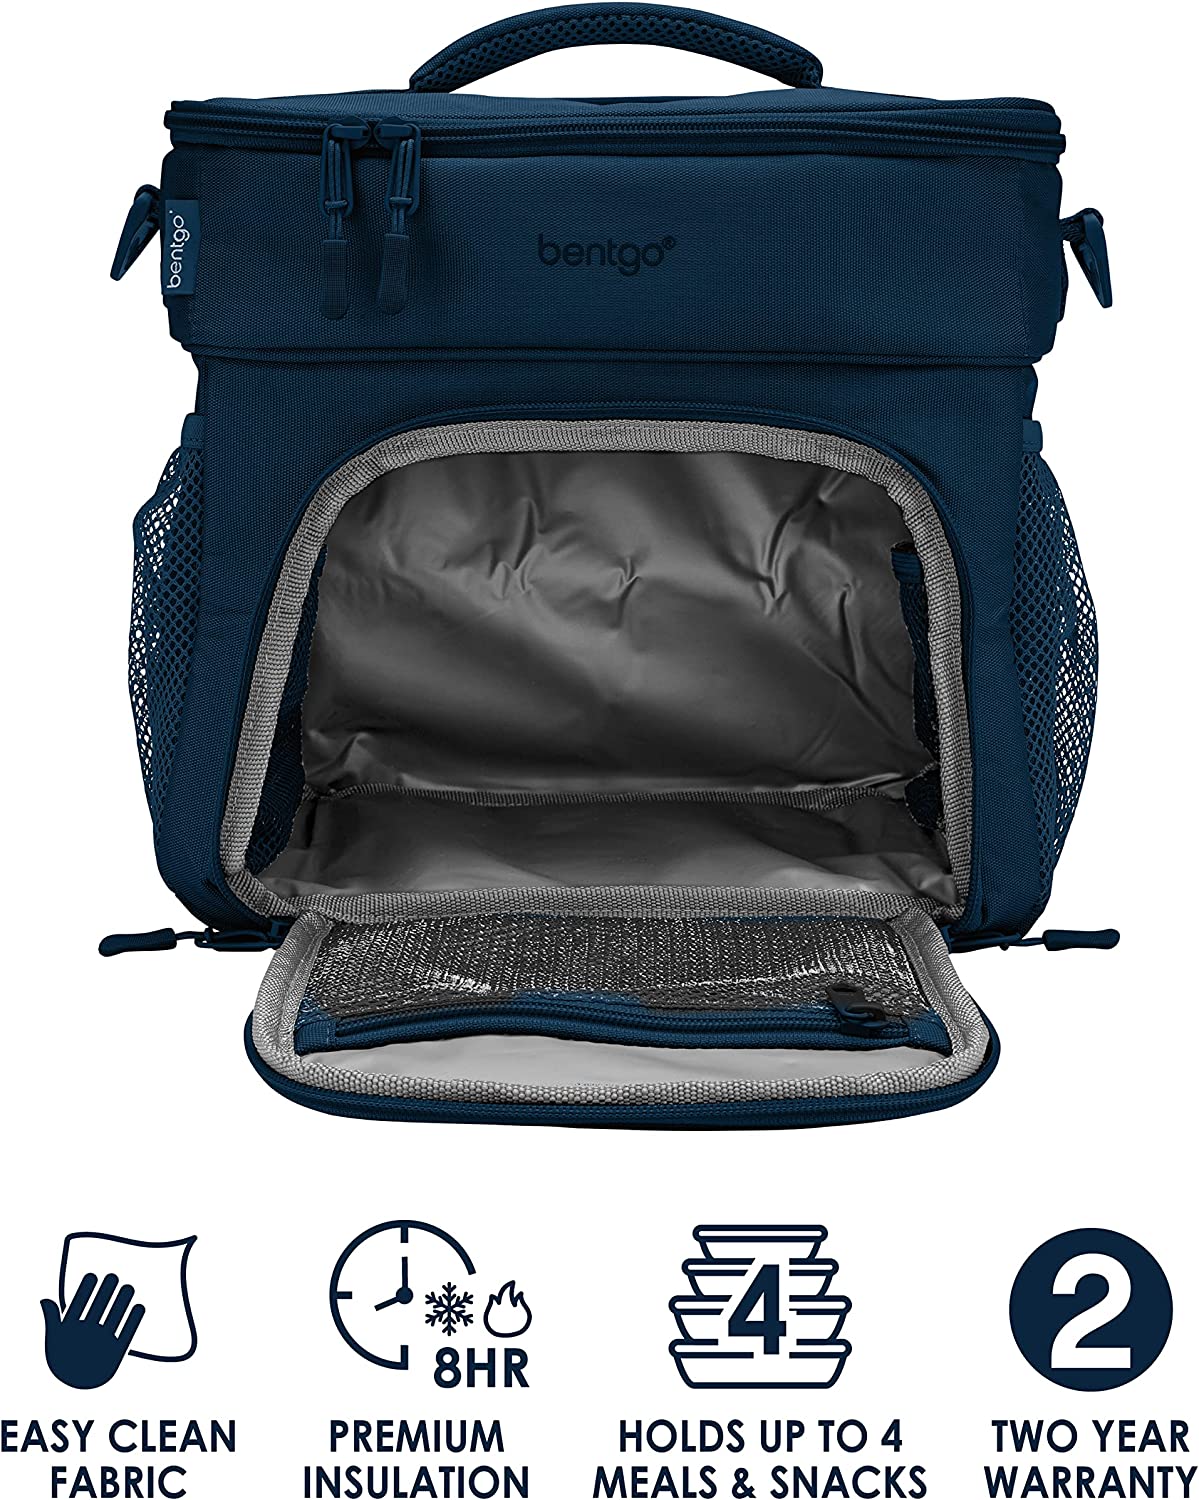 https://bigbigmart.com/wp-content/uploads/2022/07/Bentgo%C2%AE-Prep-Deluxe-Multimeal-Bag-Premium-Insulation-up-to-8-Hrs-with-Water-Resistant-Exterior-Interior-Extra-Large-Lunch-Bag-Holds-4-Meals-Snacks-Great-for-All-Day-Meal-Prep-Navy-Blue5.jpg